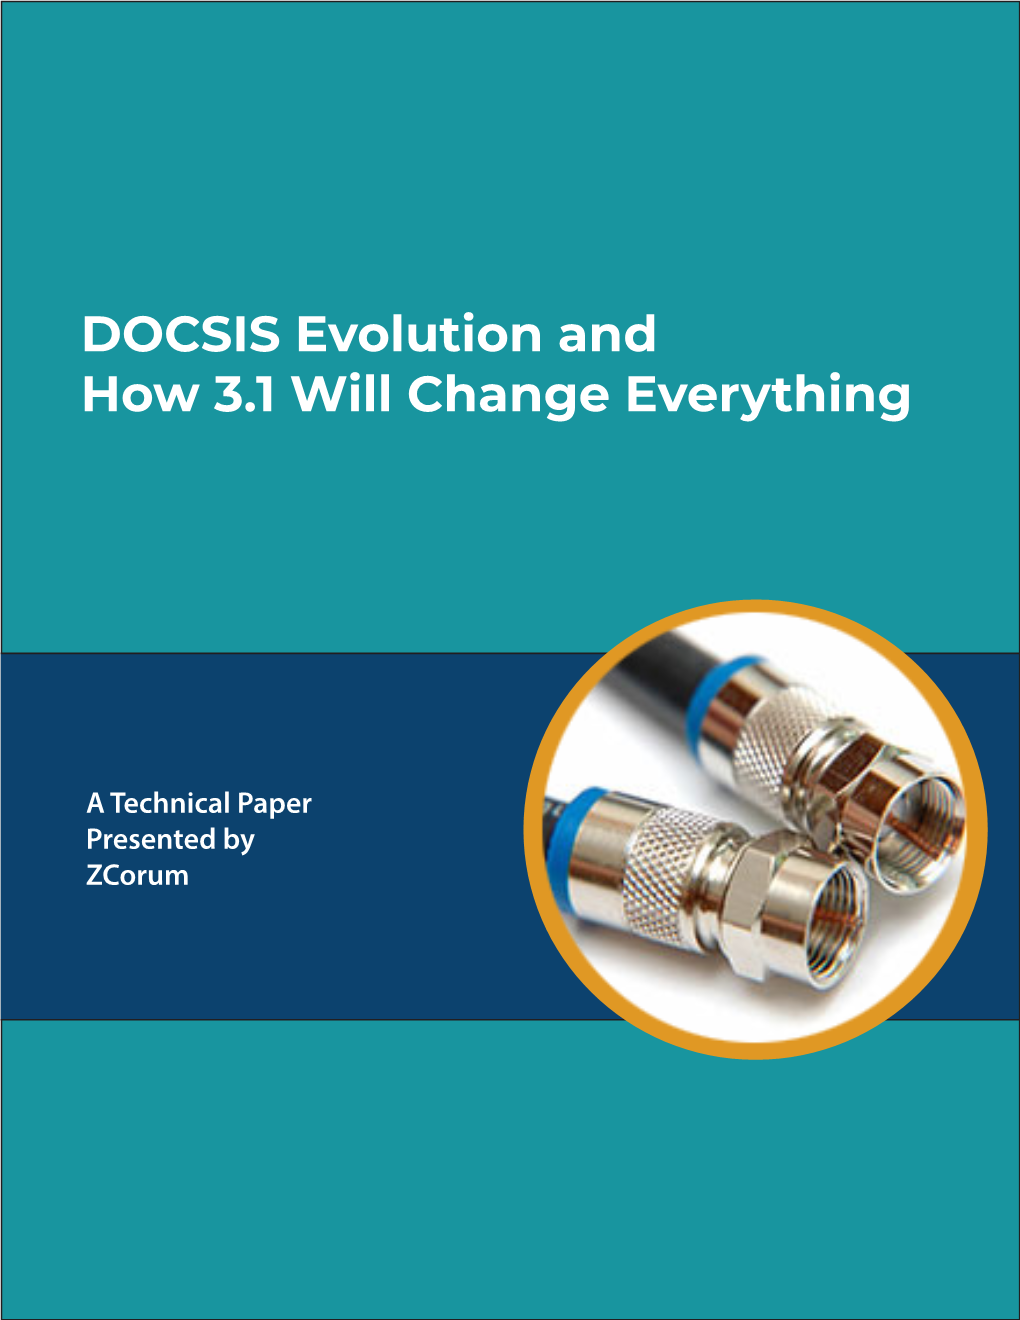 DOCSIS Evolution and How 3.1 Will Change Everything